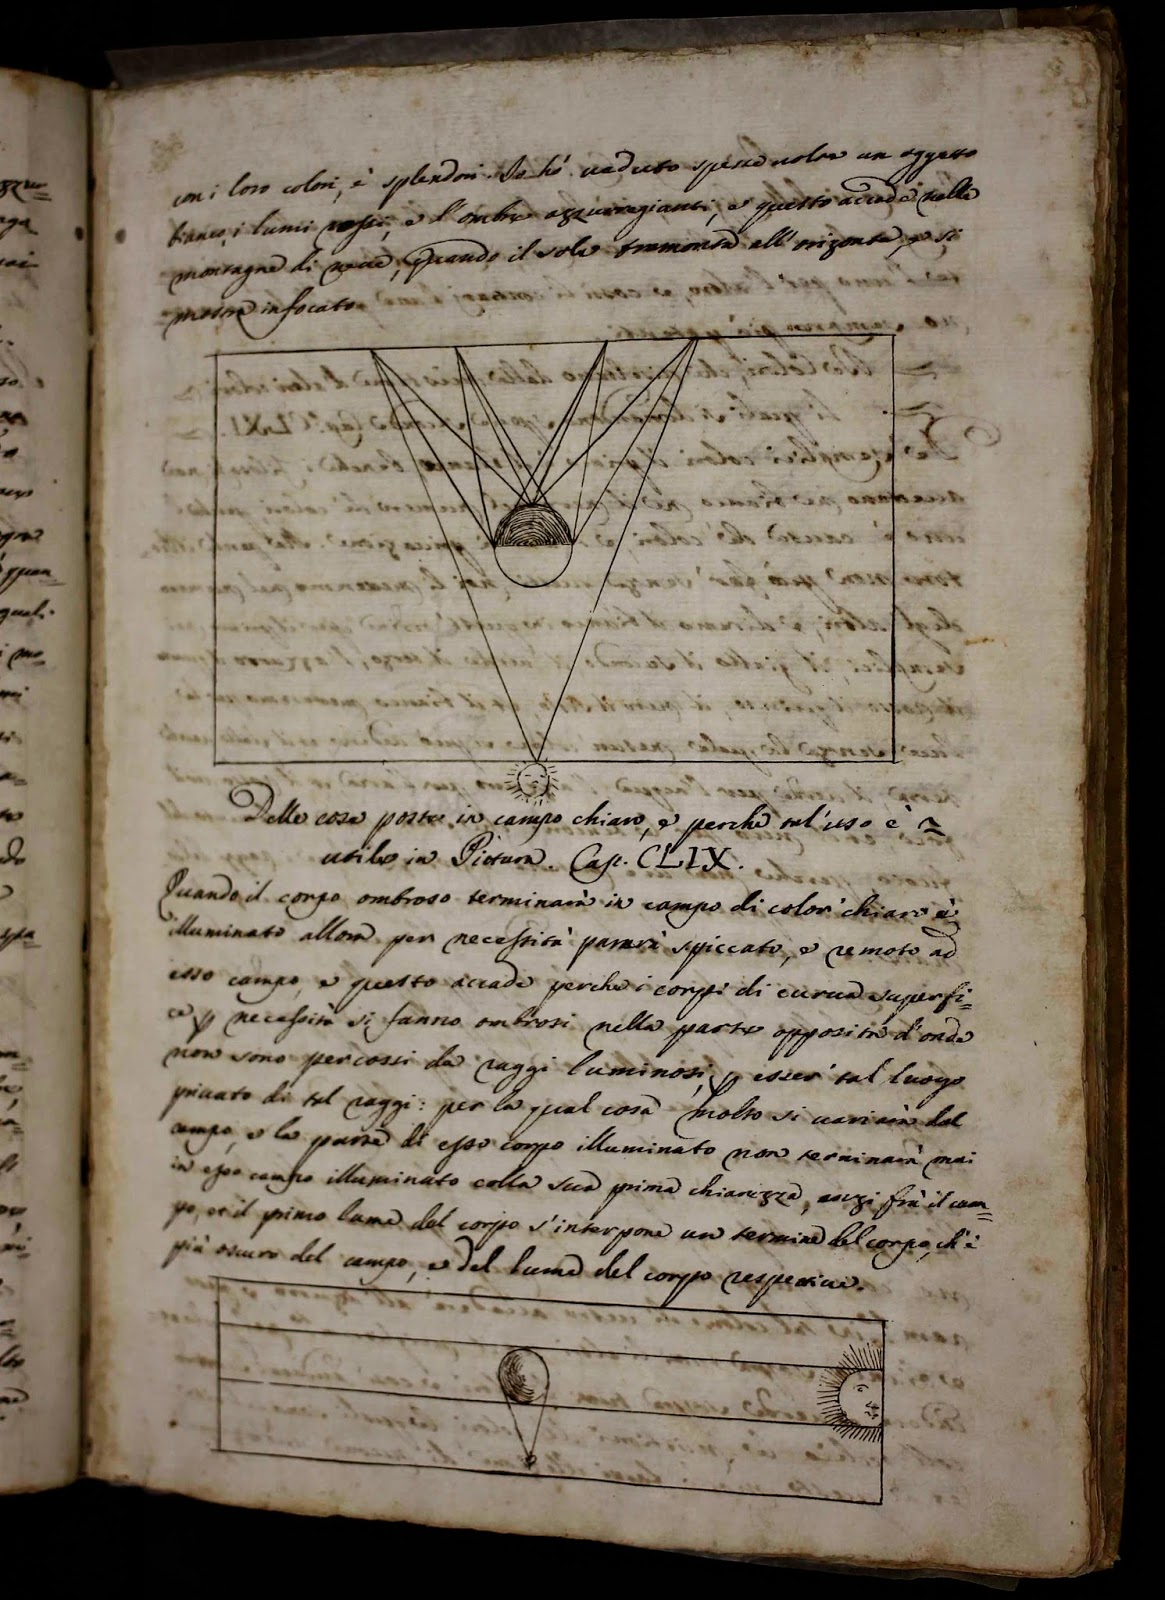 A page from Leonardo da Vinci's notebooks with handwritten text and drawn diagrams